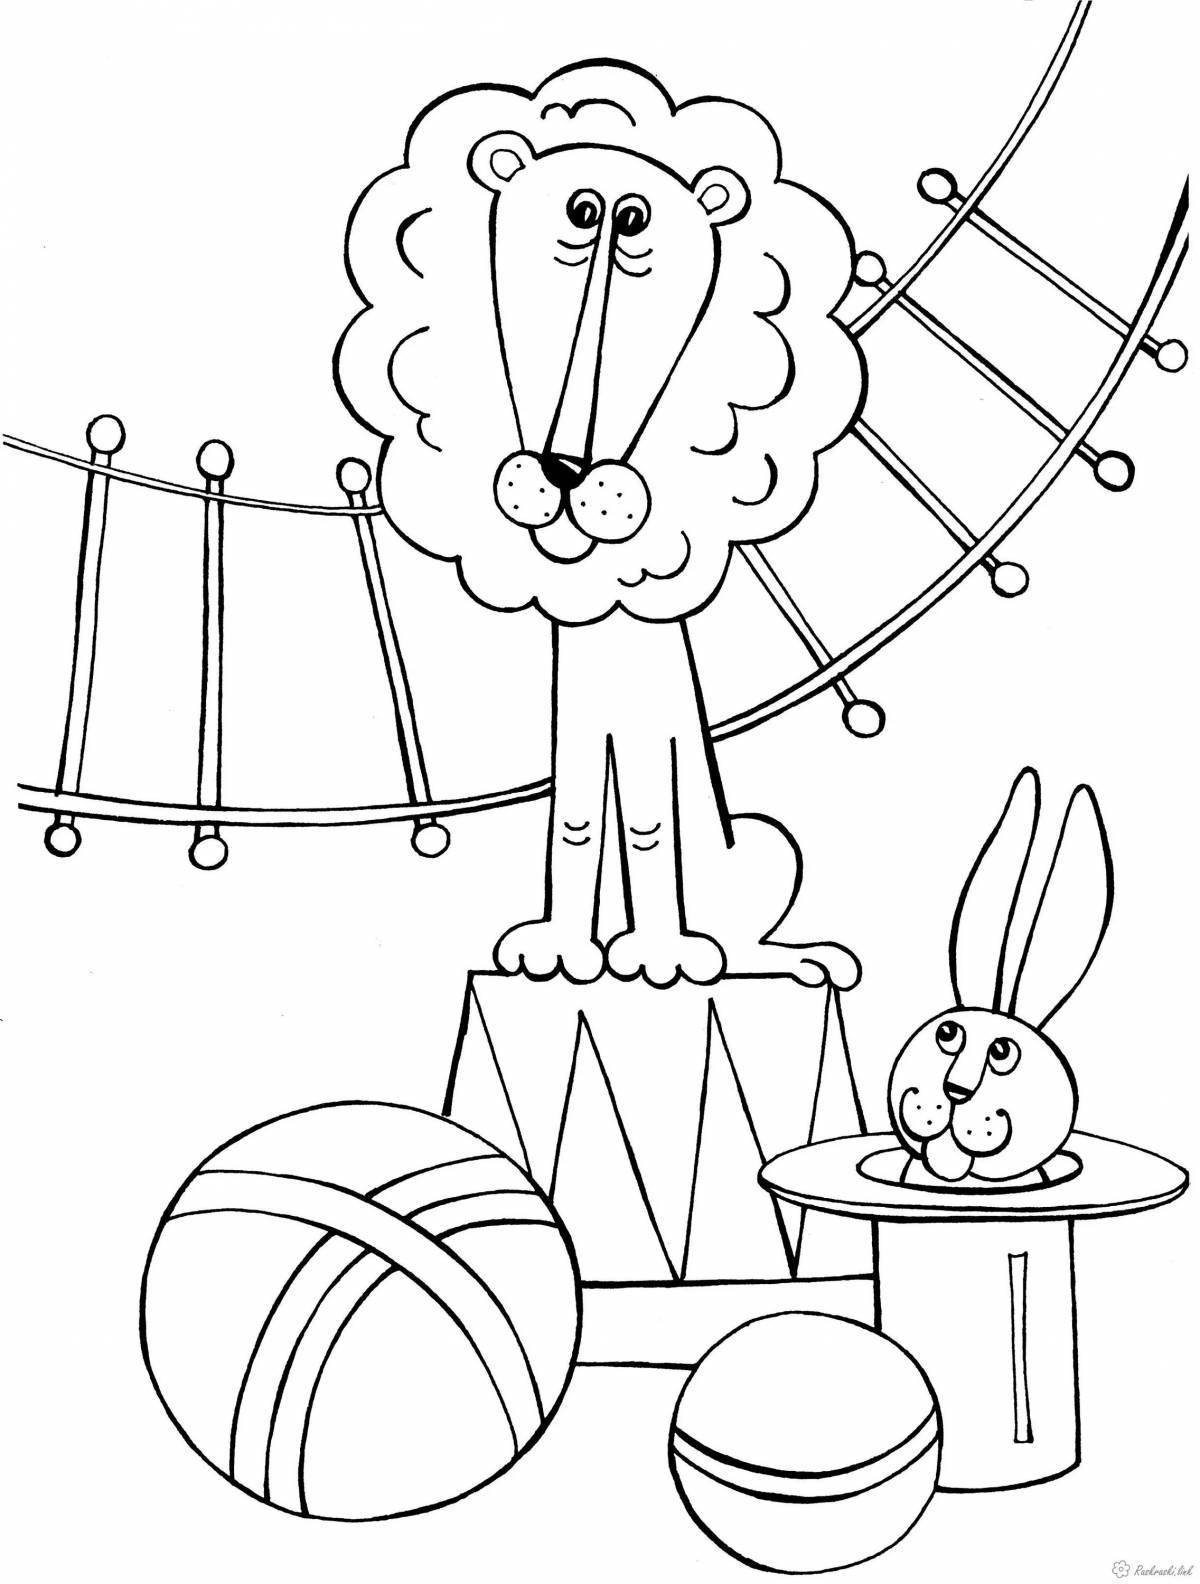 Coloring page amazing circus performer